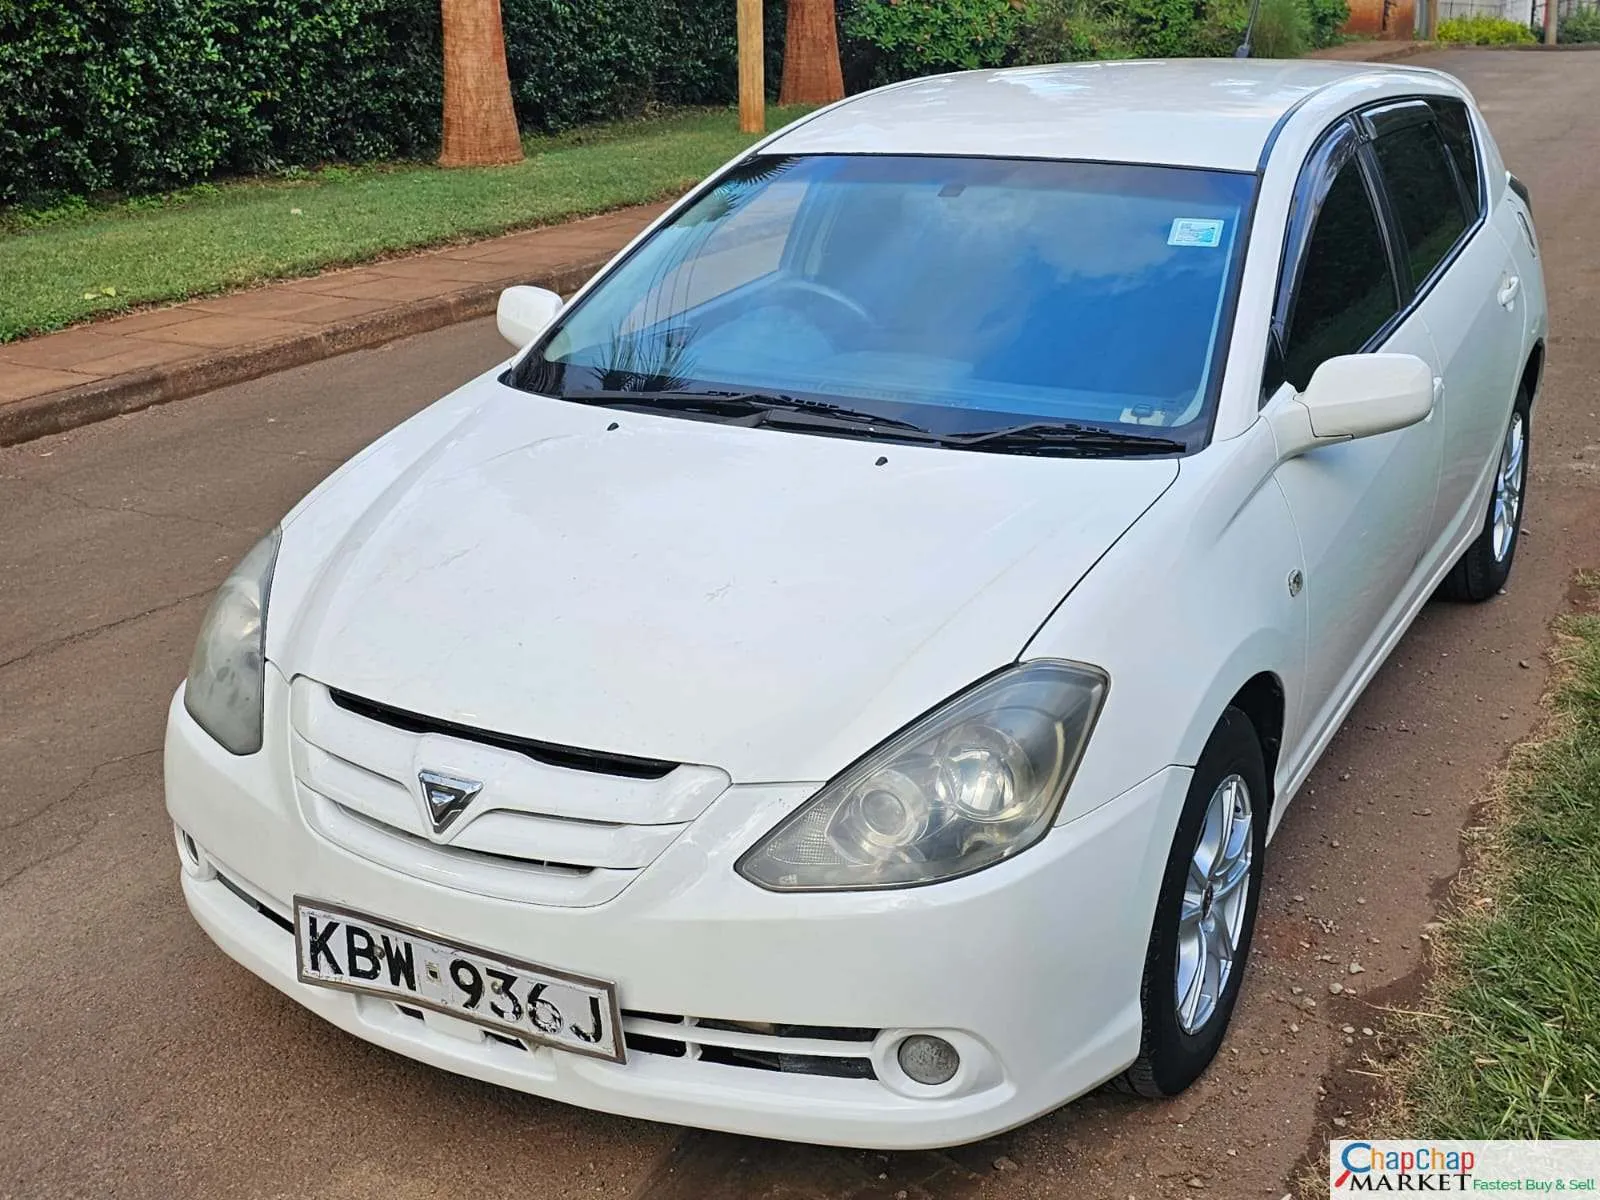 Toyota CALDINA ASIAN OWNER You Pay 30% DEPOSIT Trade in Ok Exclusive SOLD